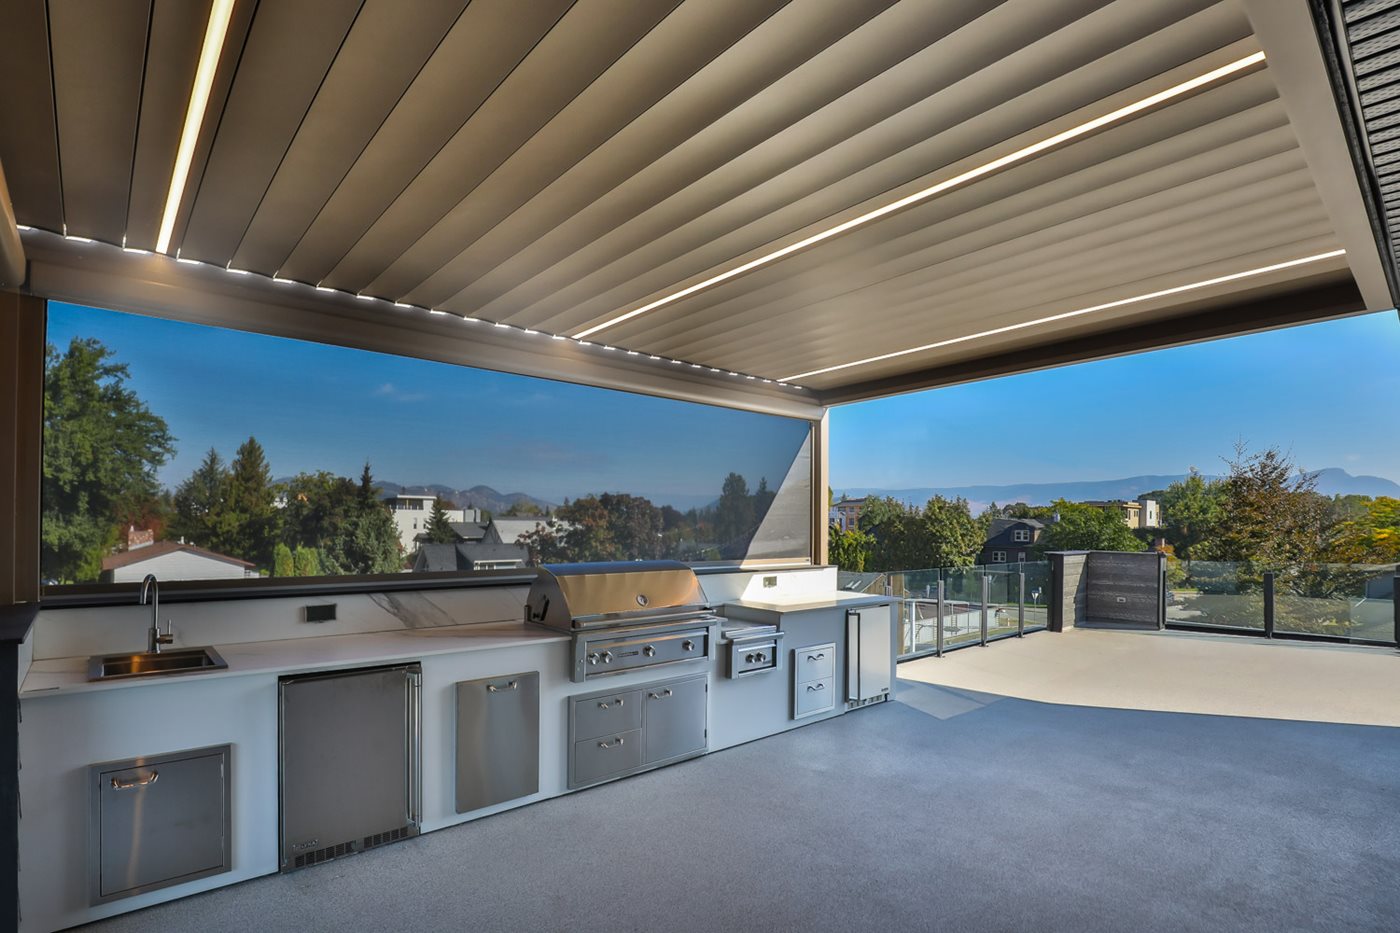 Alba-Over-Outdoor-Kitchen-at-Canadian-Residence-by-Bella-Outdoor-Living.jpg